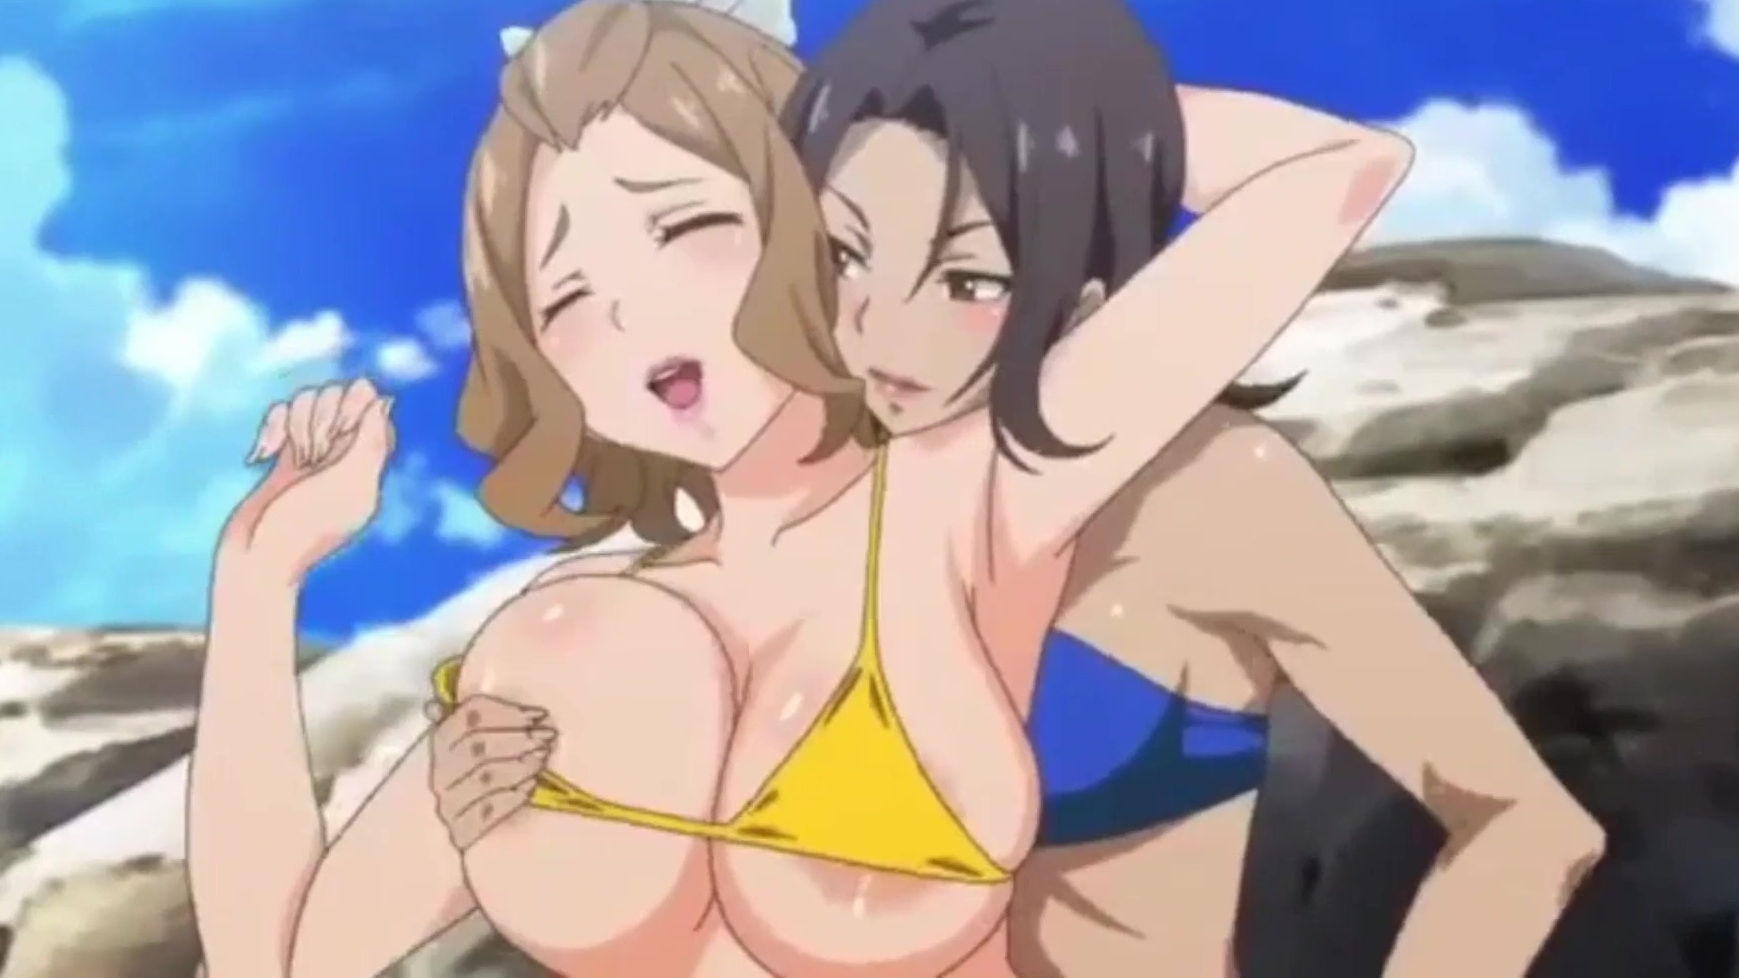 Anime ecchi huge boob and butt shemale